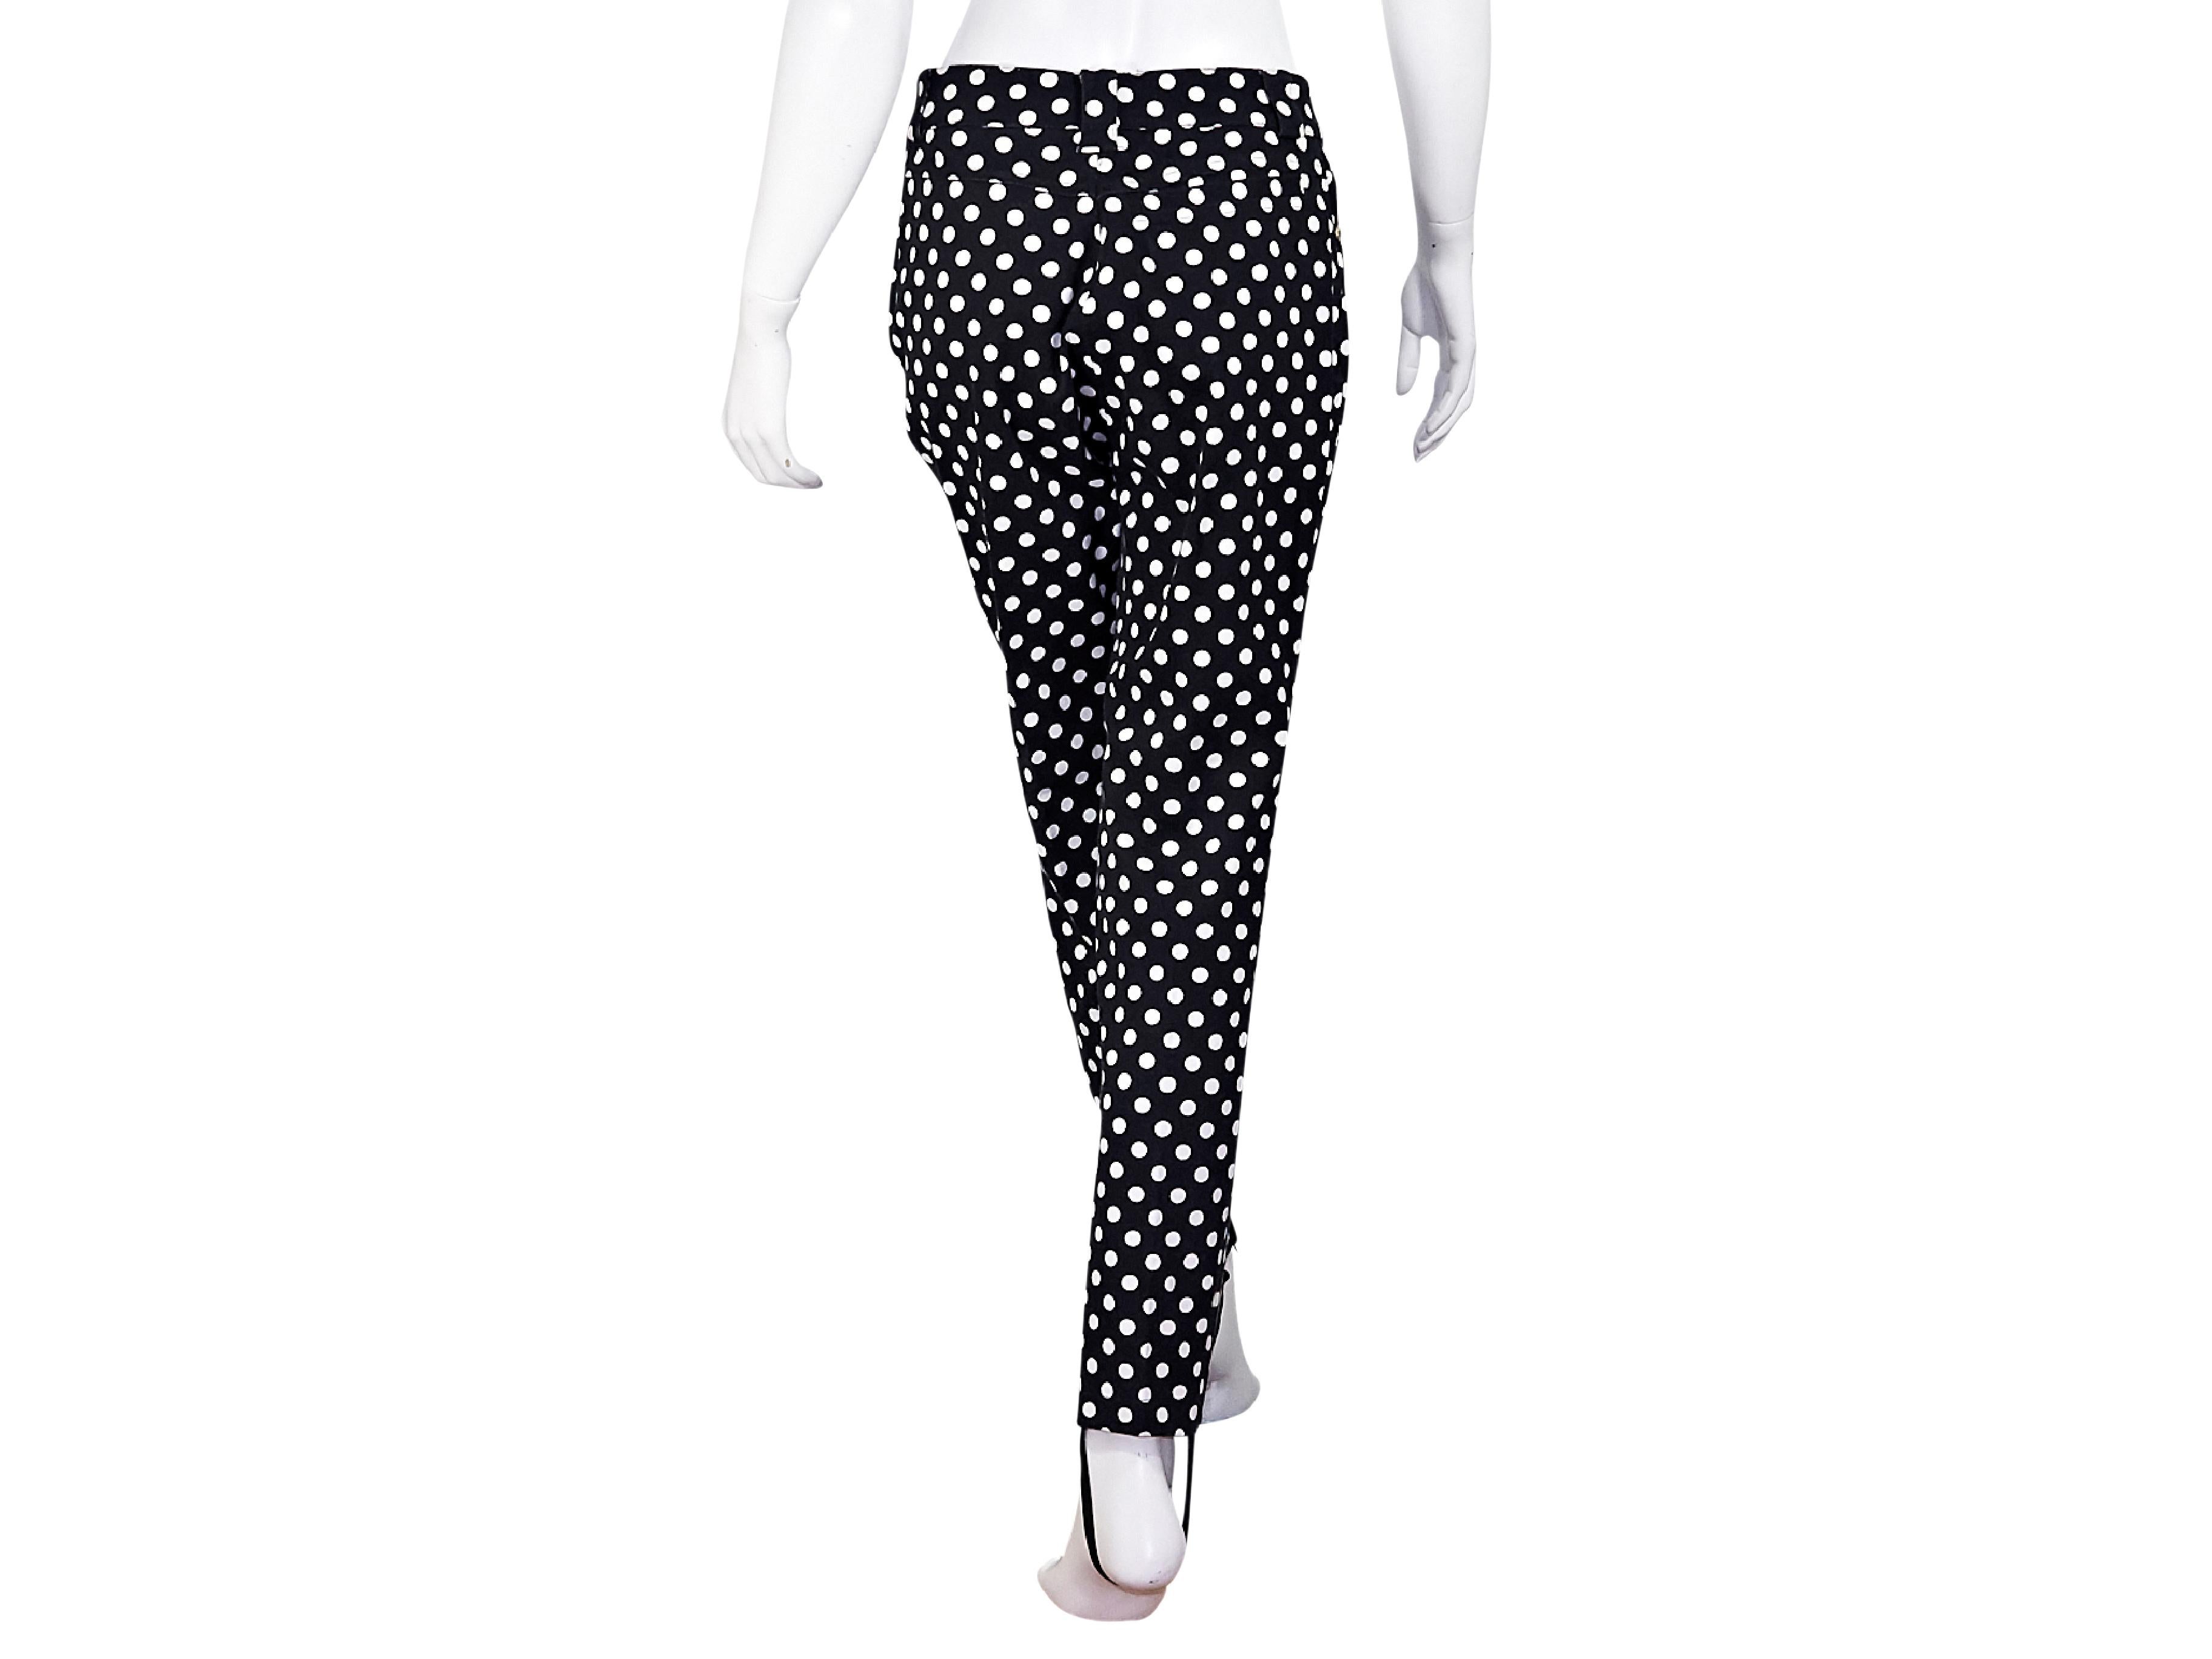 Product details:  Vintage black and white polka-dot stirrup pants by Gianni Versace Couture.  High rise.  Banded waist with belt loops.  Button and zip fly closure.  Goldtone hardware.  30